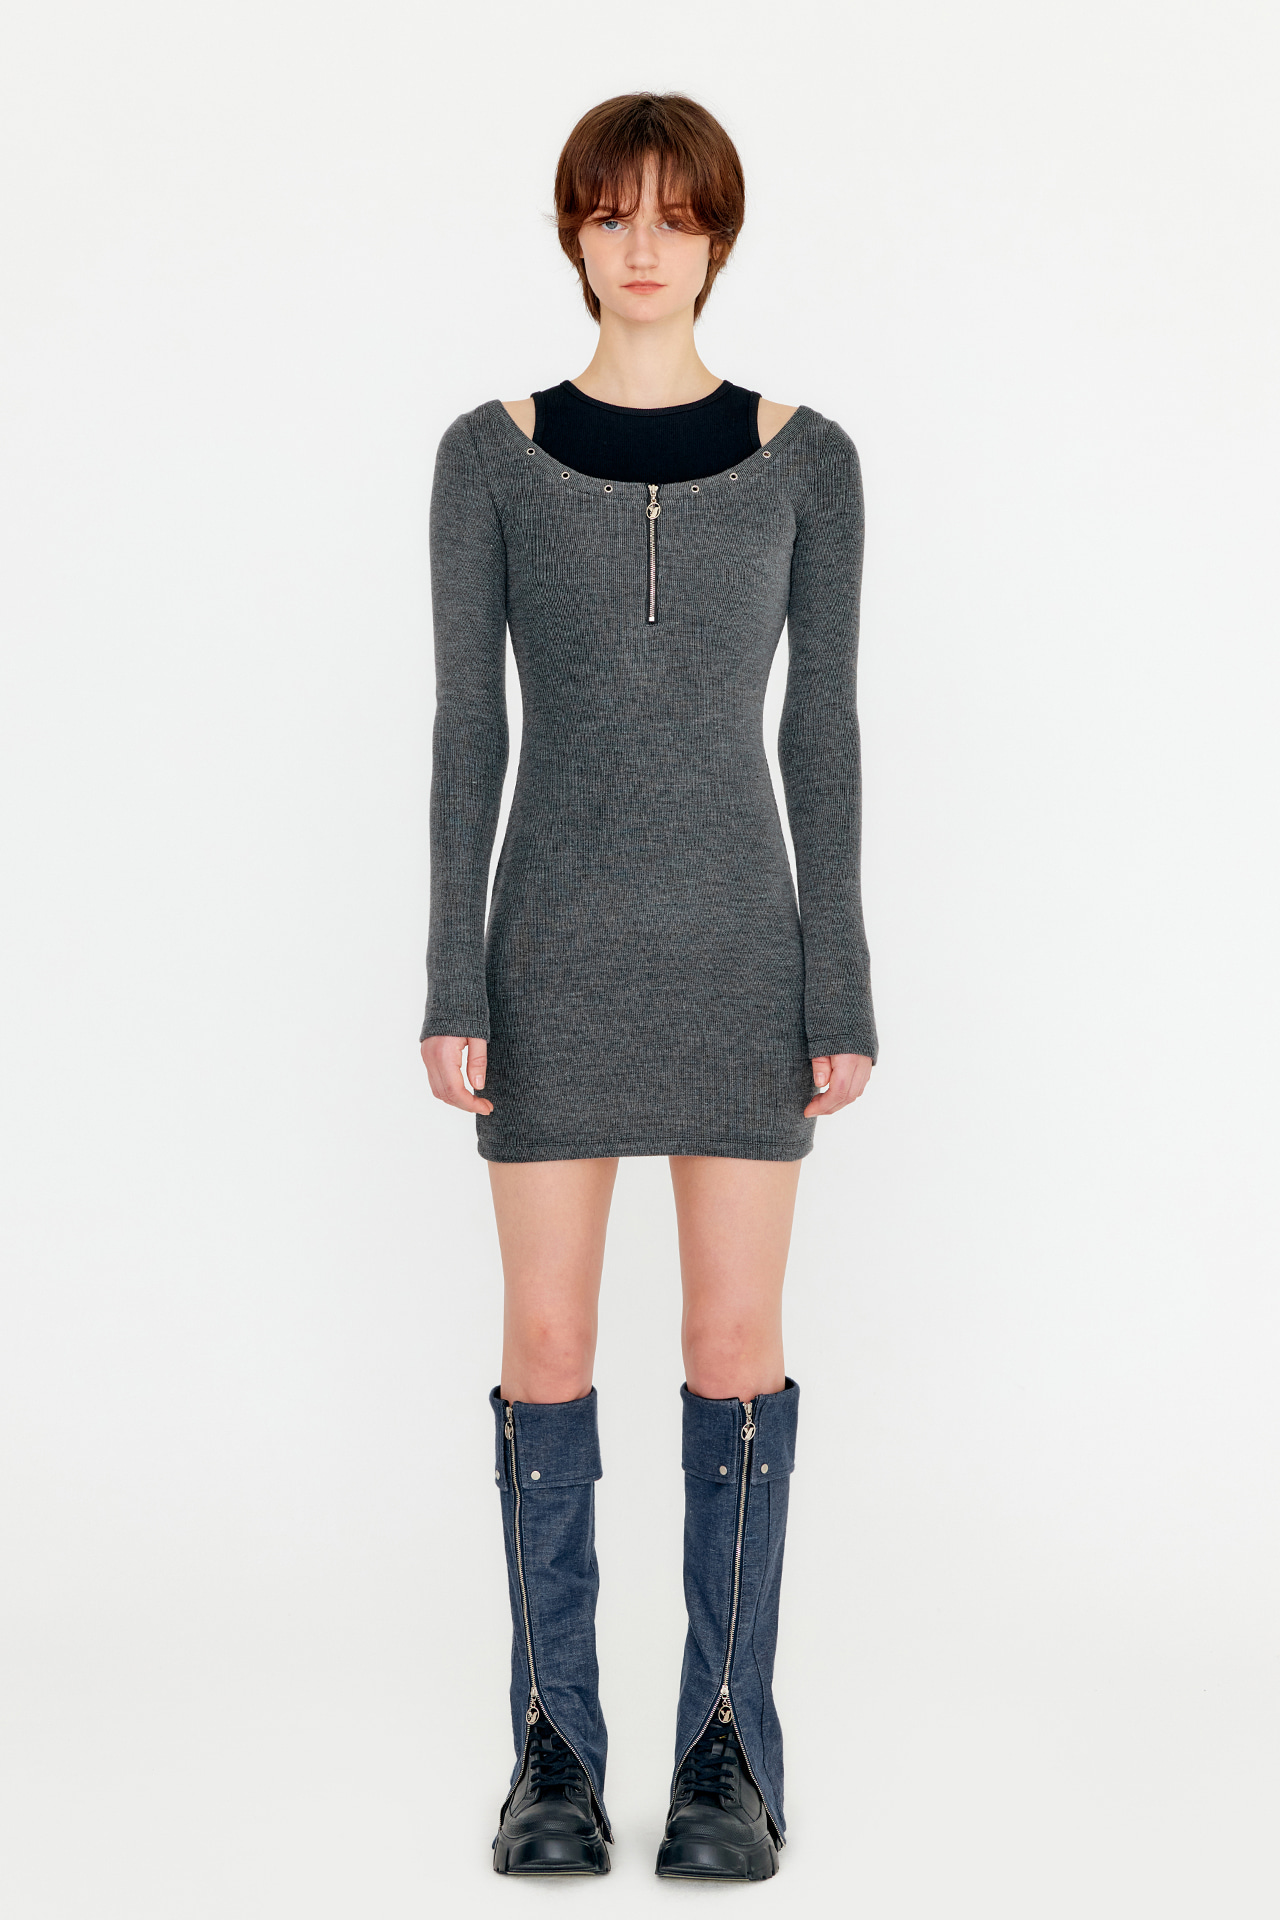 CUT OUT LAYERED EYELET DRESS TOP - CHARCOAL